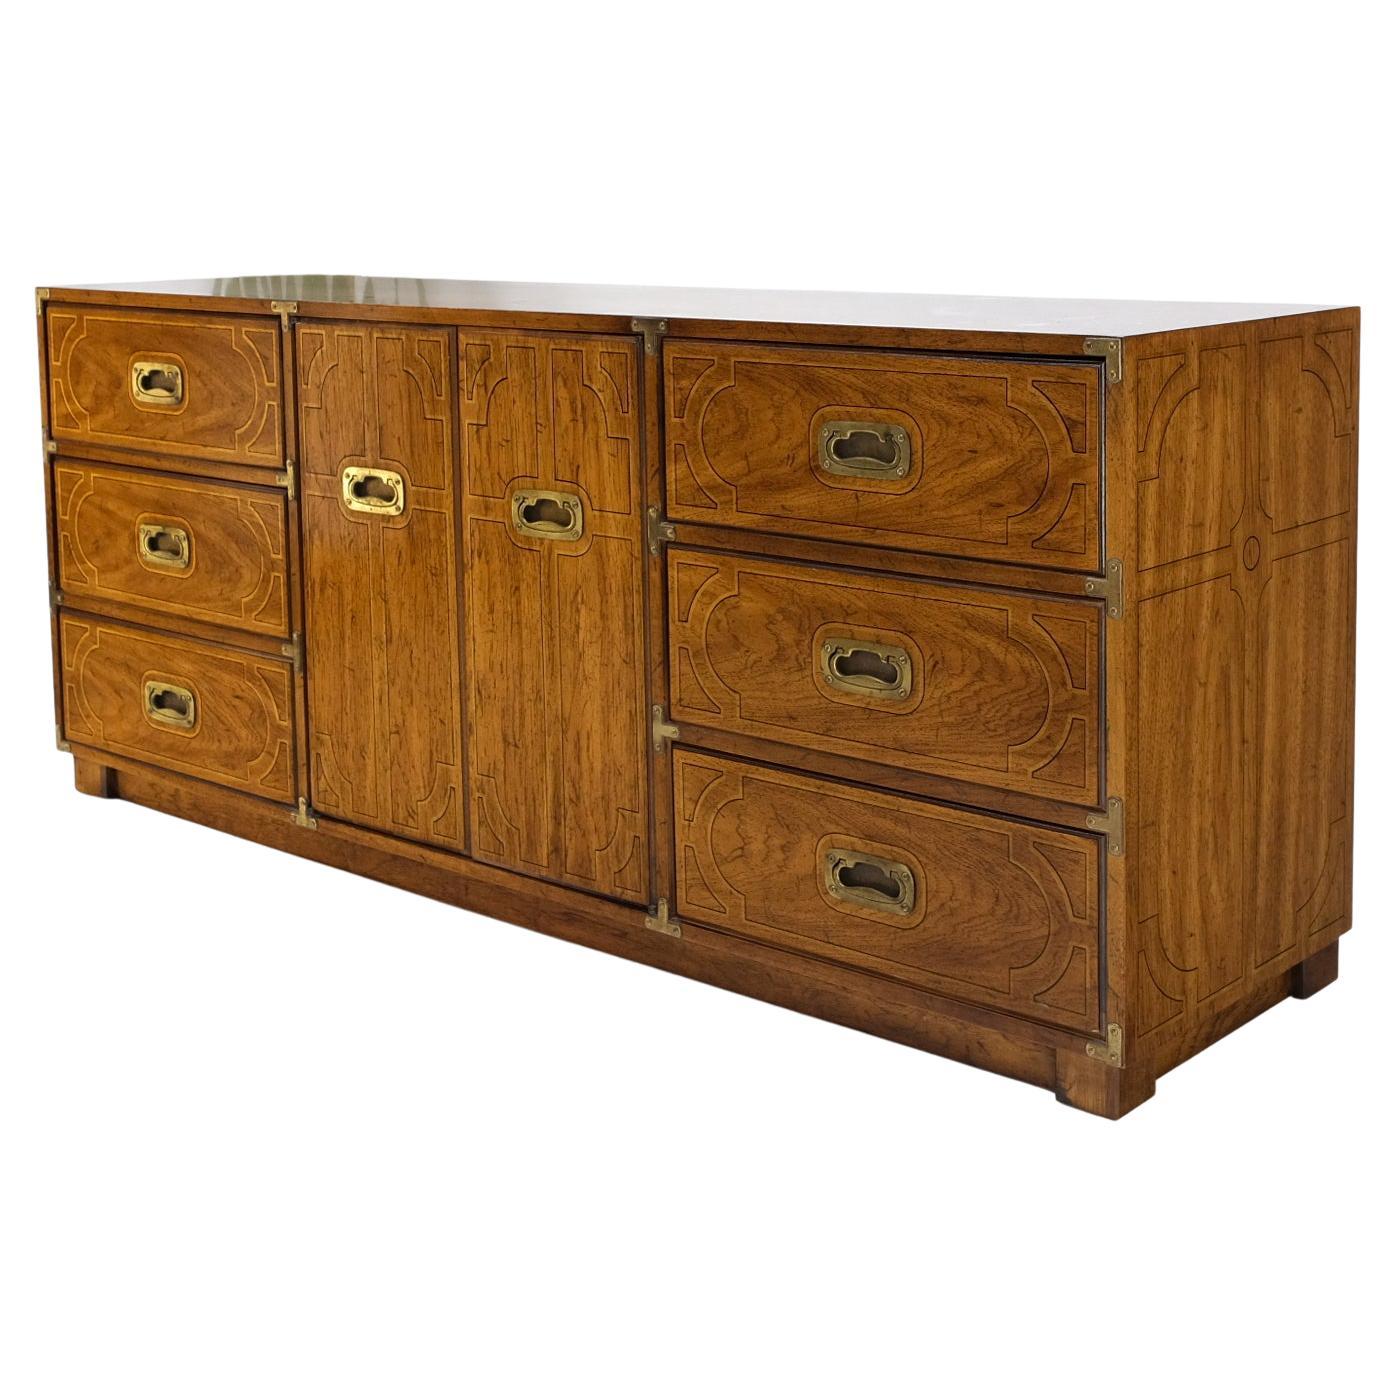 Campaign Style 9 Drawers Two Doors Compartment Paint Decorated Dresser Credenza